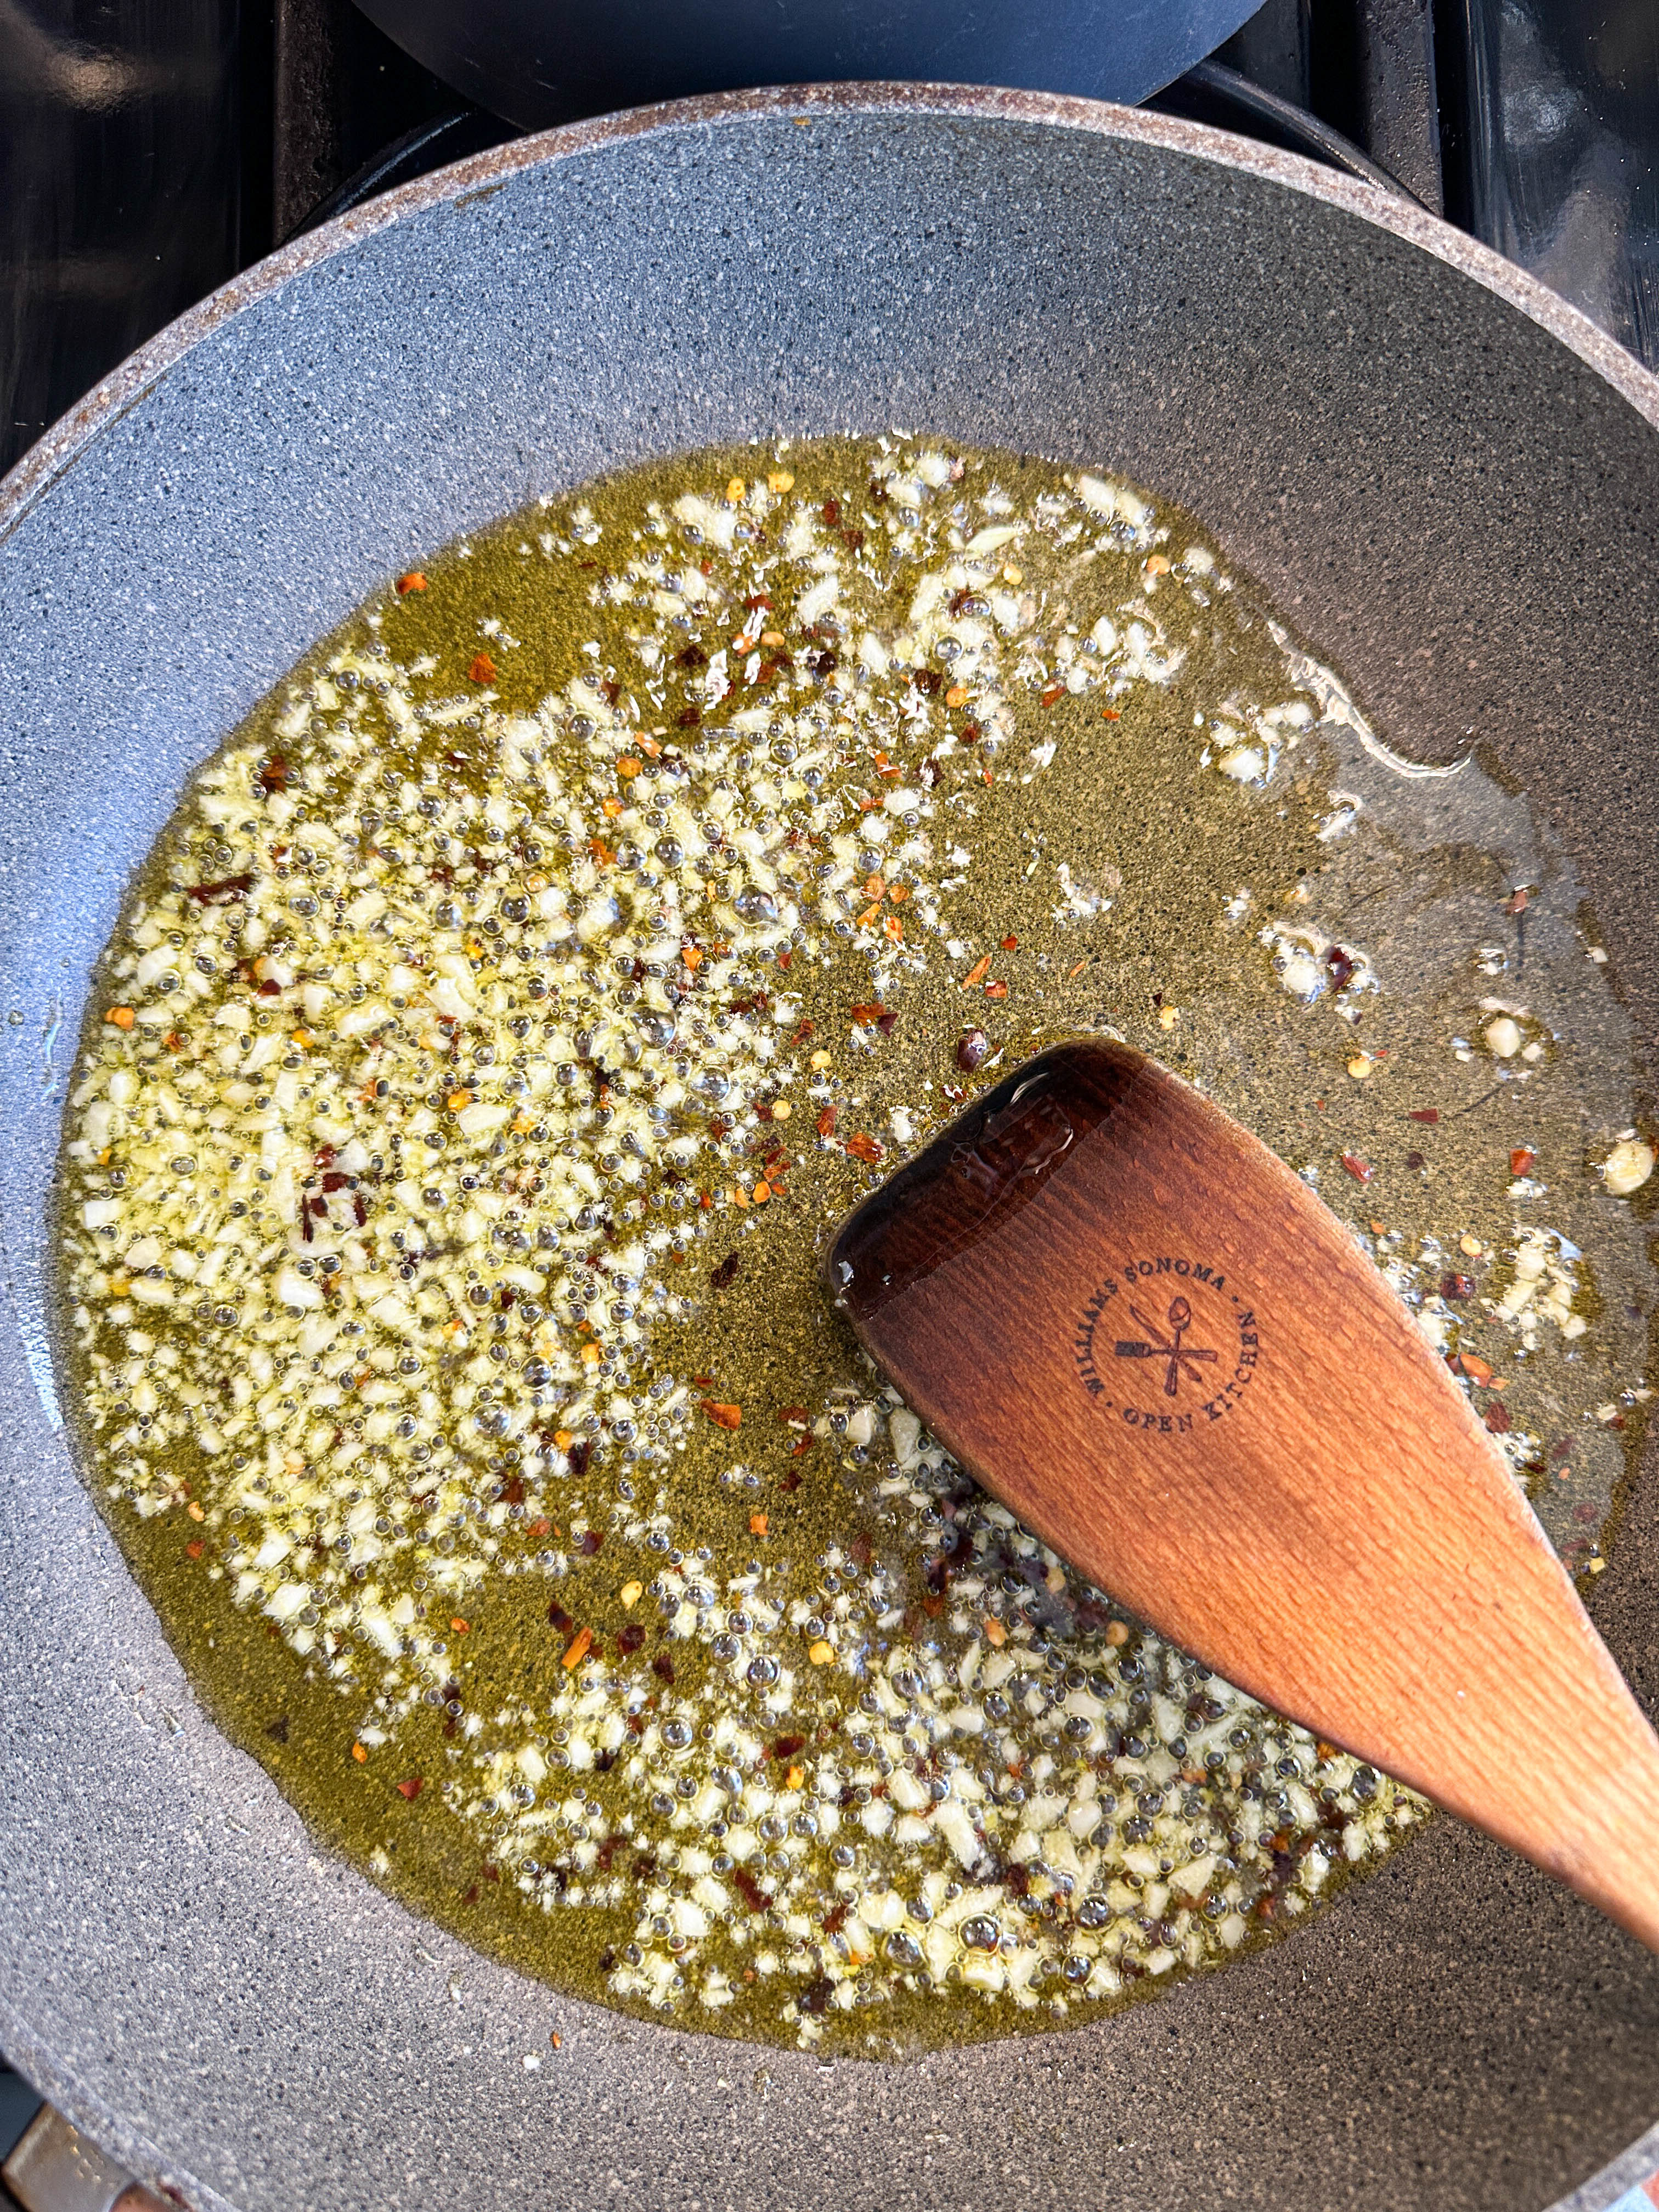 A wooden spatula rests in a pan with oil and spices being cooked on a stove